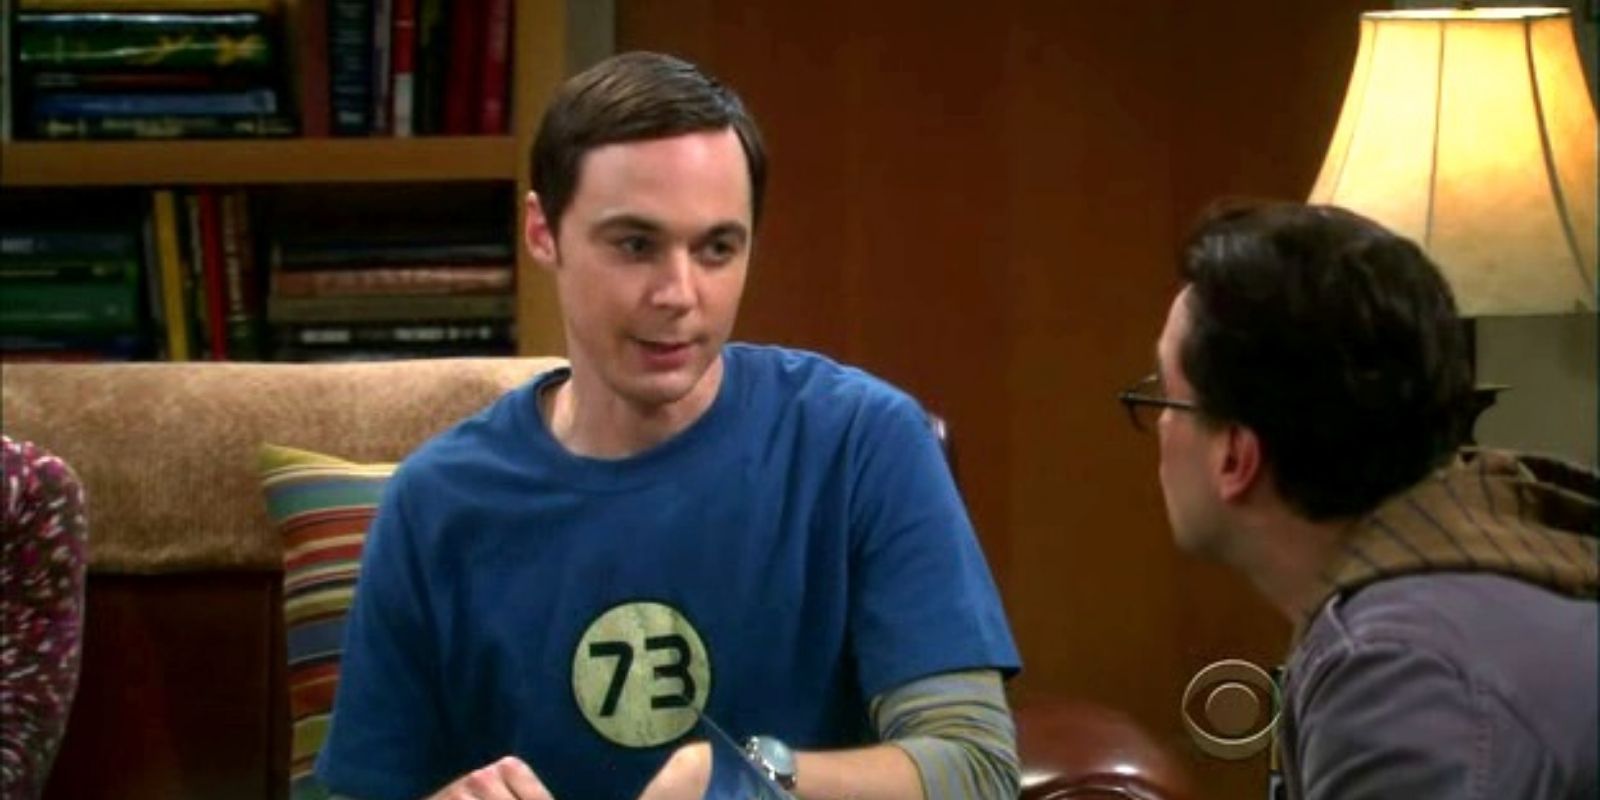 Sheldon Cooper wearing a blue shirt with the number 73 in a circle in The Big Bang Theory